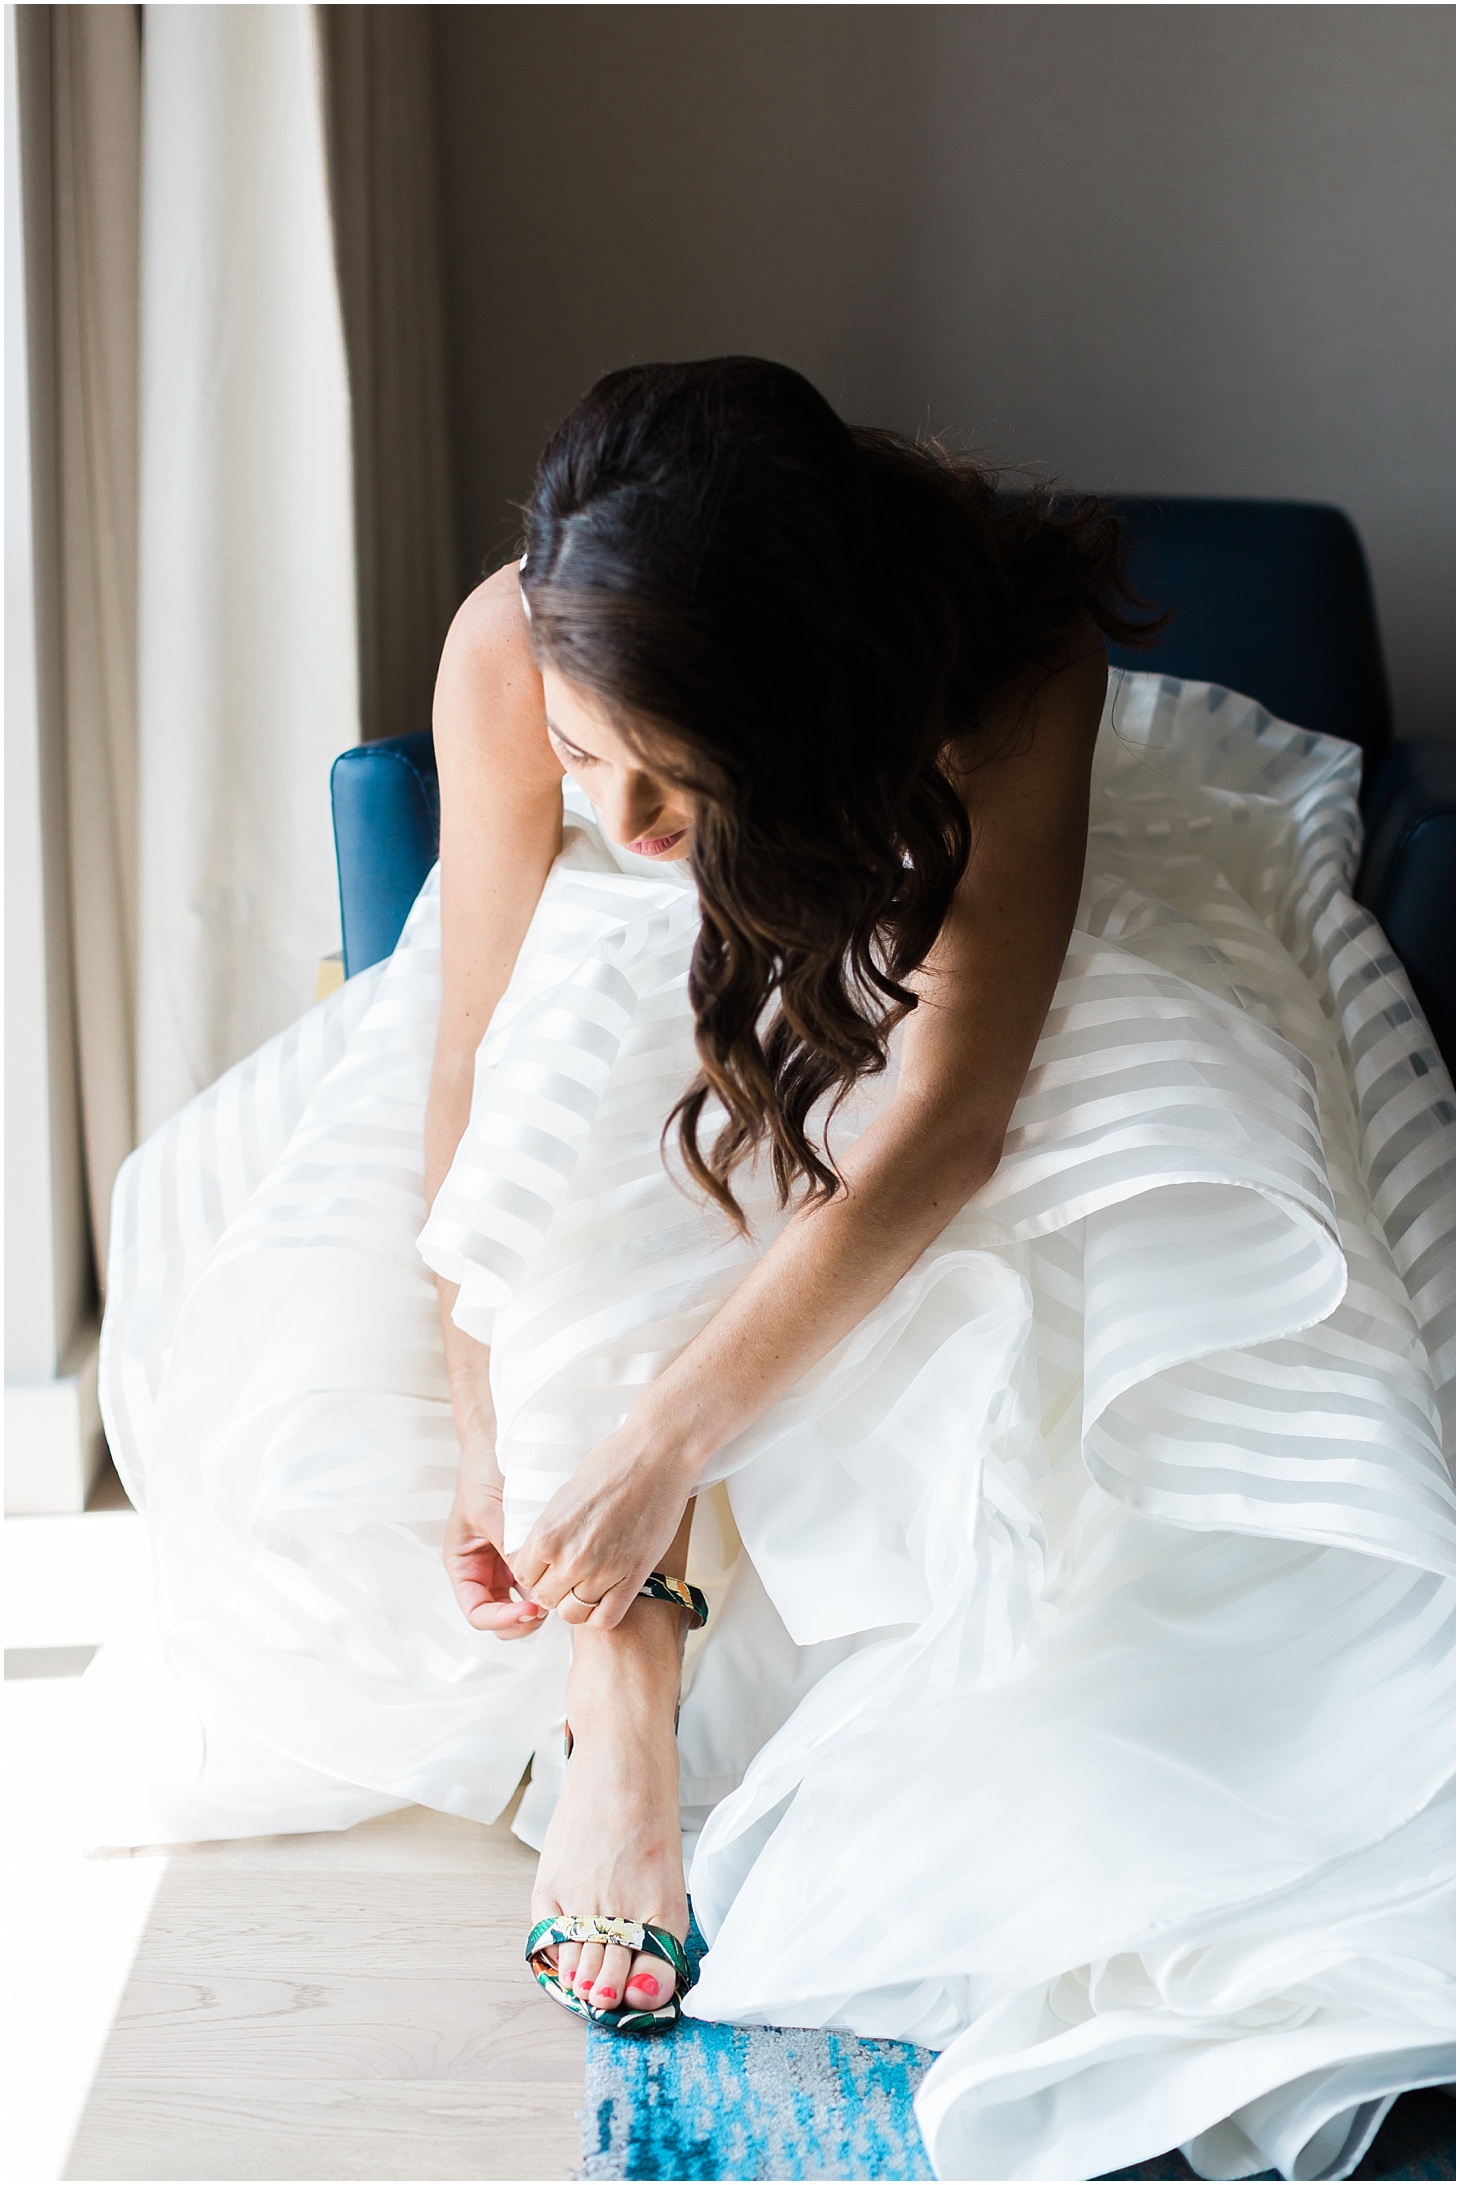 Bride Getting Ready in the Water Suite at the Intercontinental Hotel - The Wharf | Hayley Paige Wedding Gown and Stuart Weitzman Shoes | Chic and Modern Interfaith Wedding at District Winery in Washington, DC | Sarah Bradshaw Photography